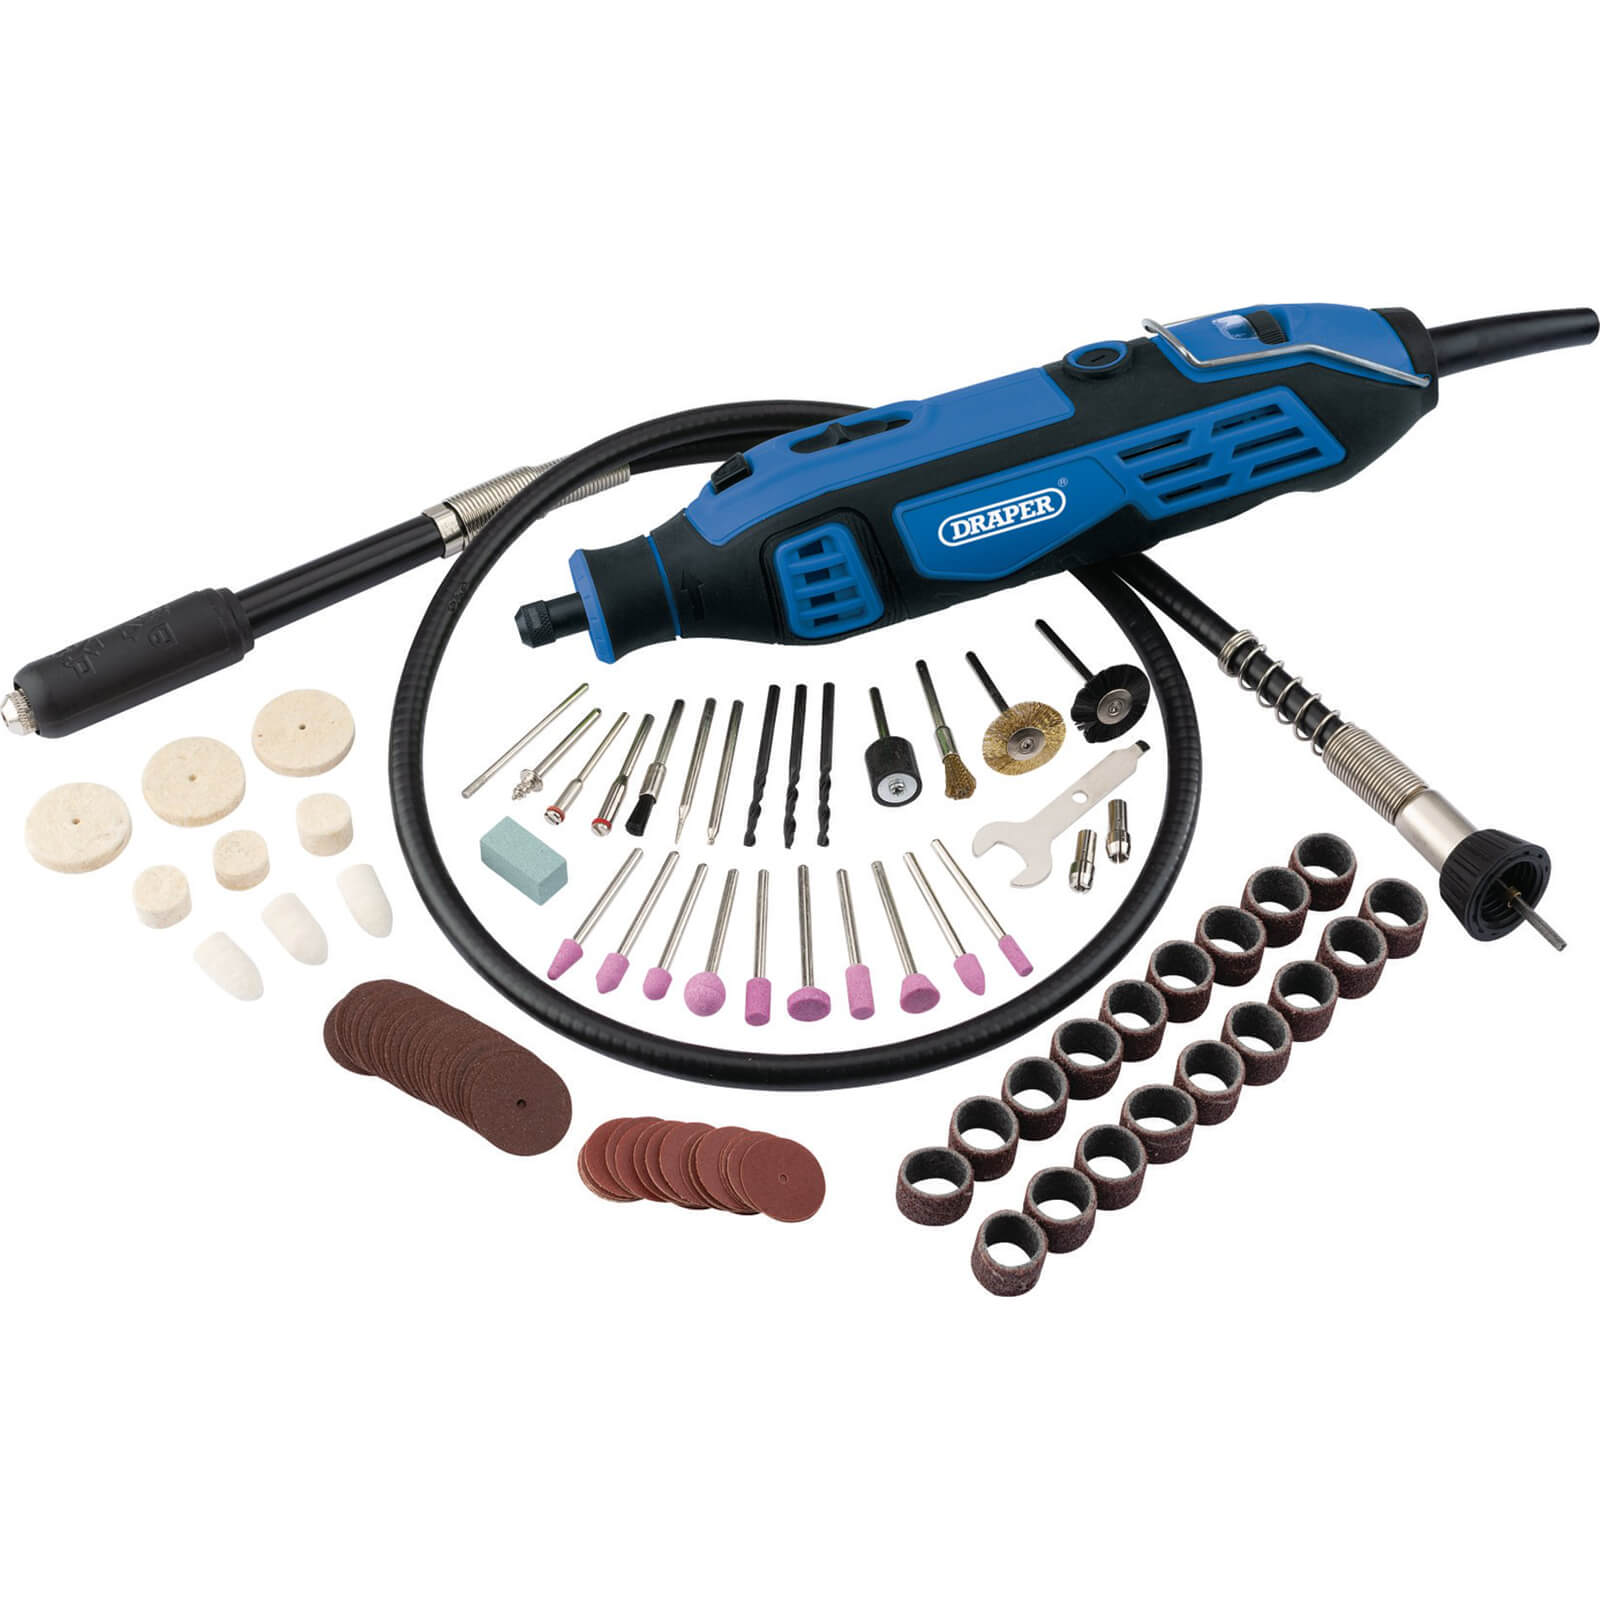 Draper MT180D111 Rotary Multi Tool and 111 Piece Accessory Kit 240v